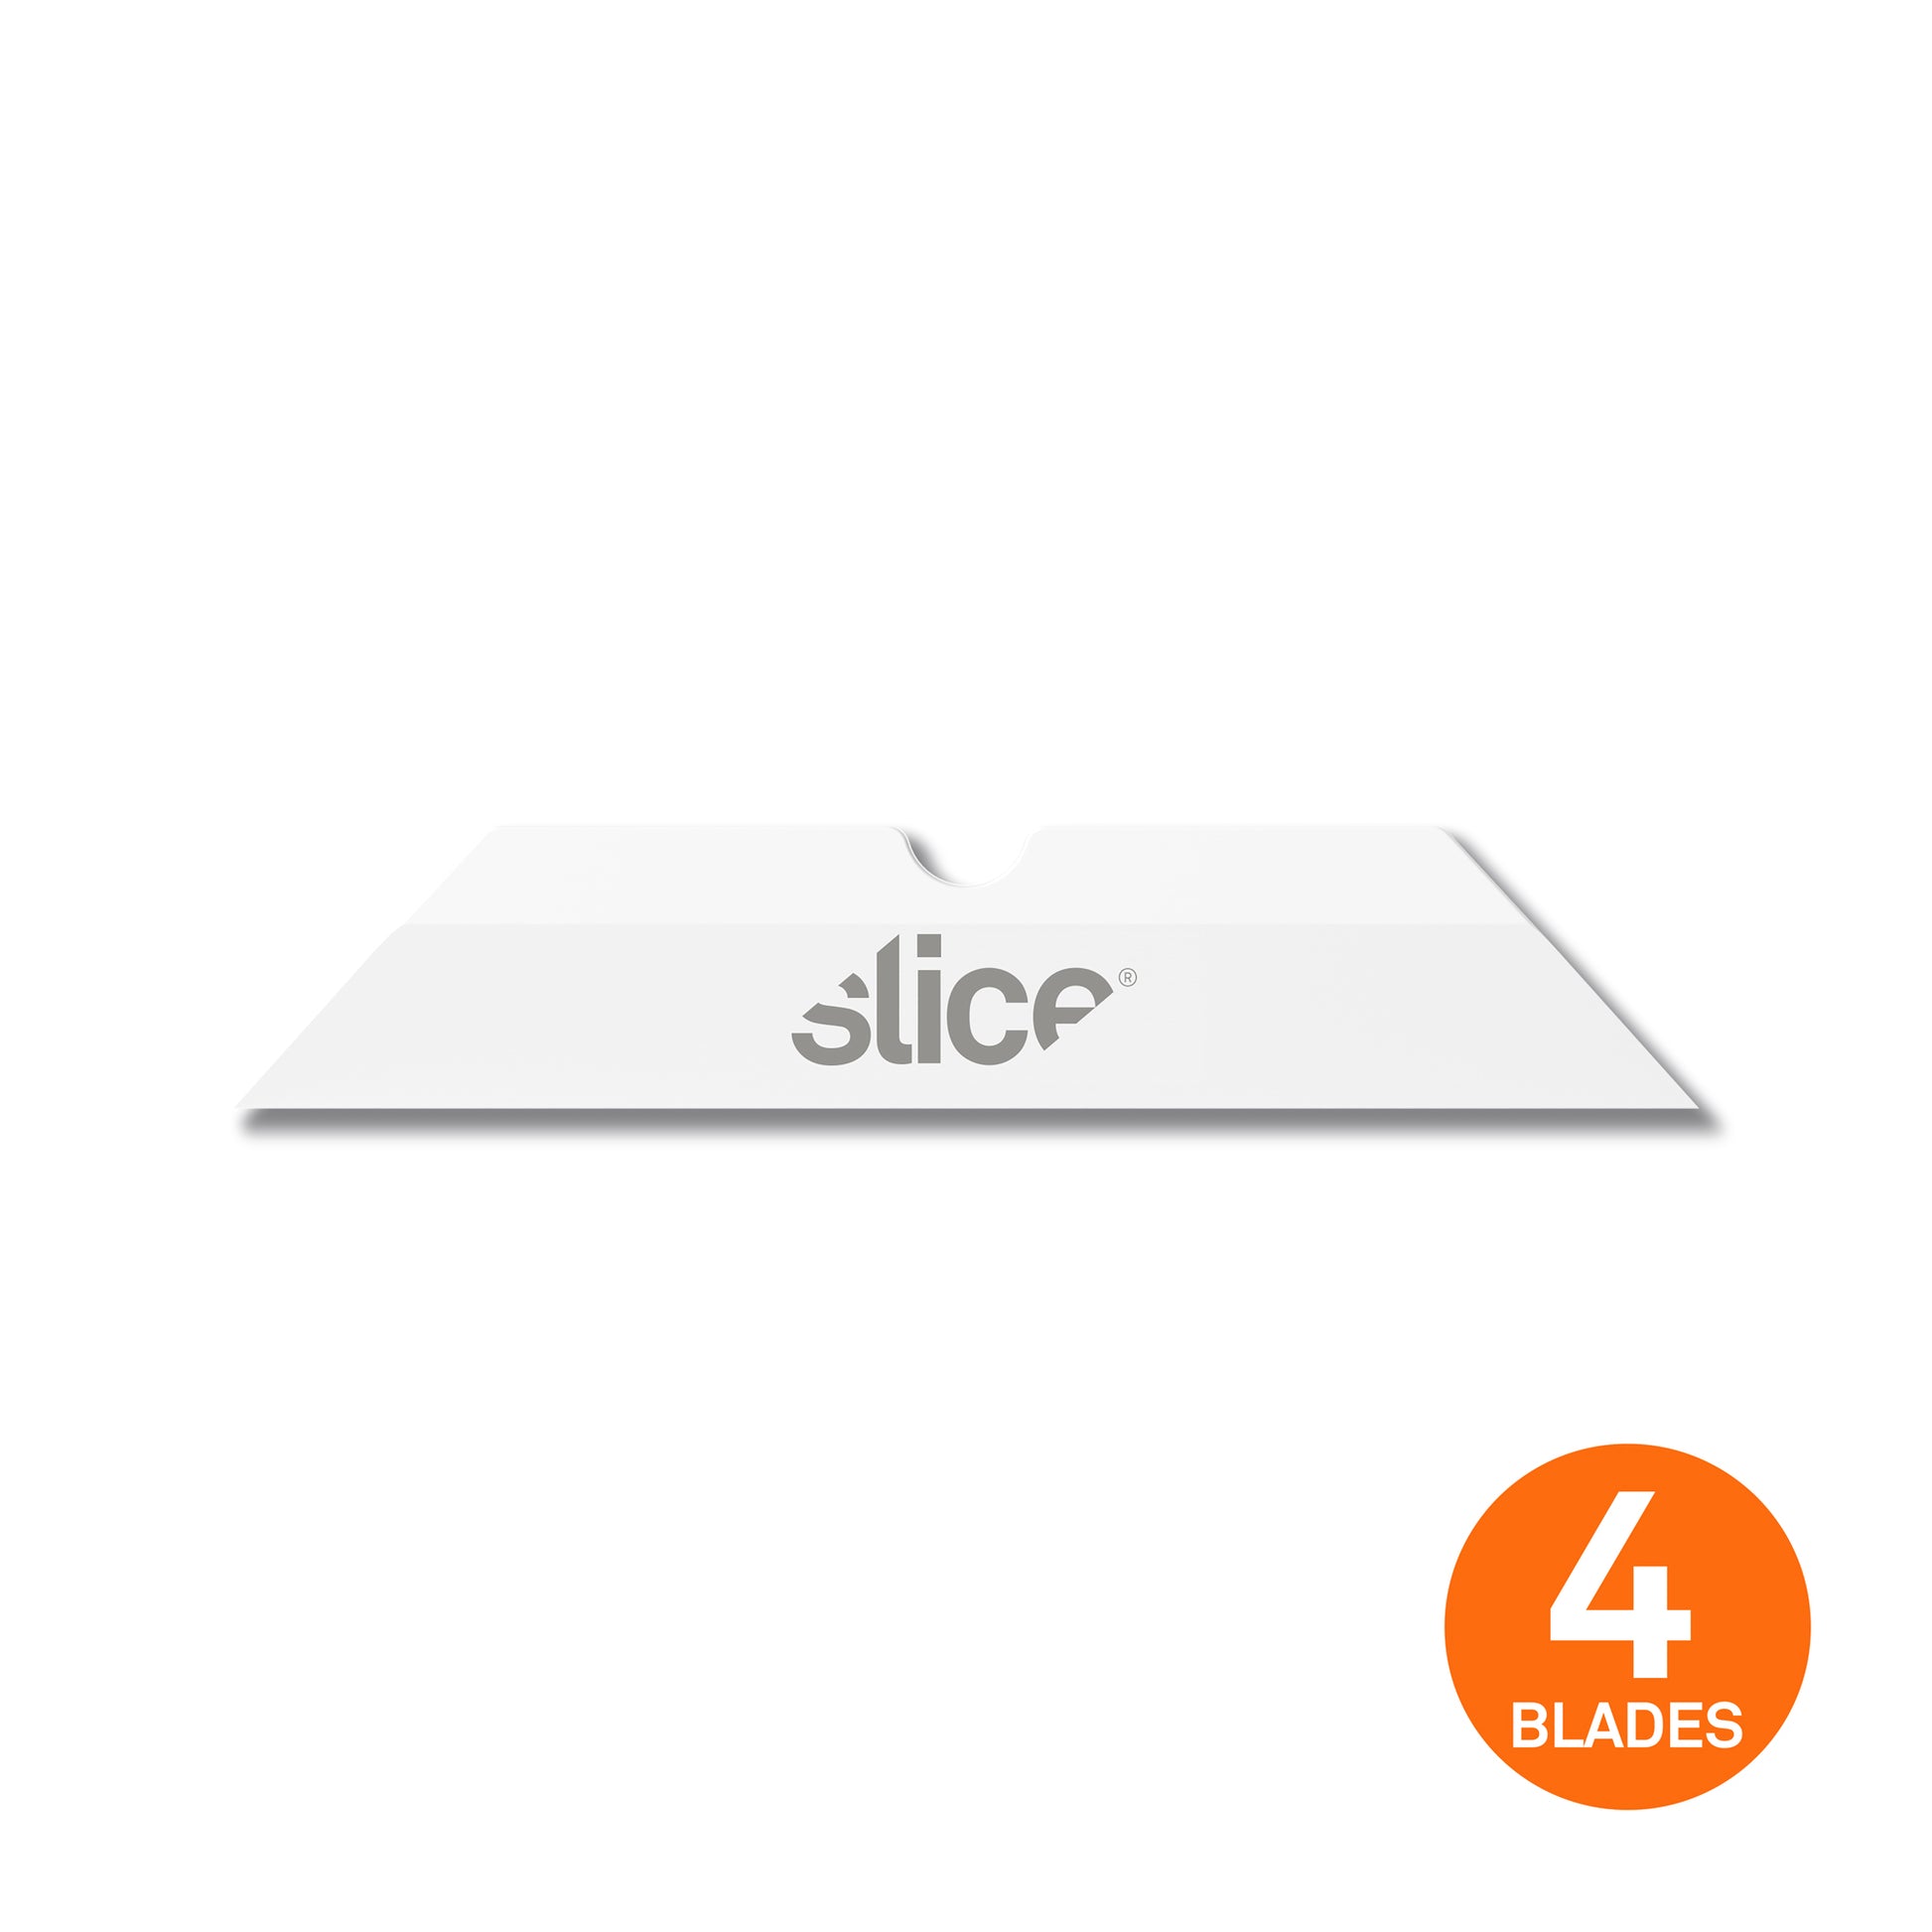 Slice Box Cutter Blades (Pointed Tip) - DaltonSafety